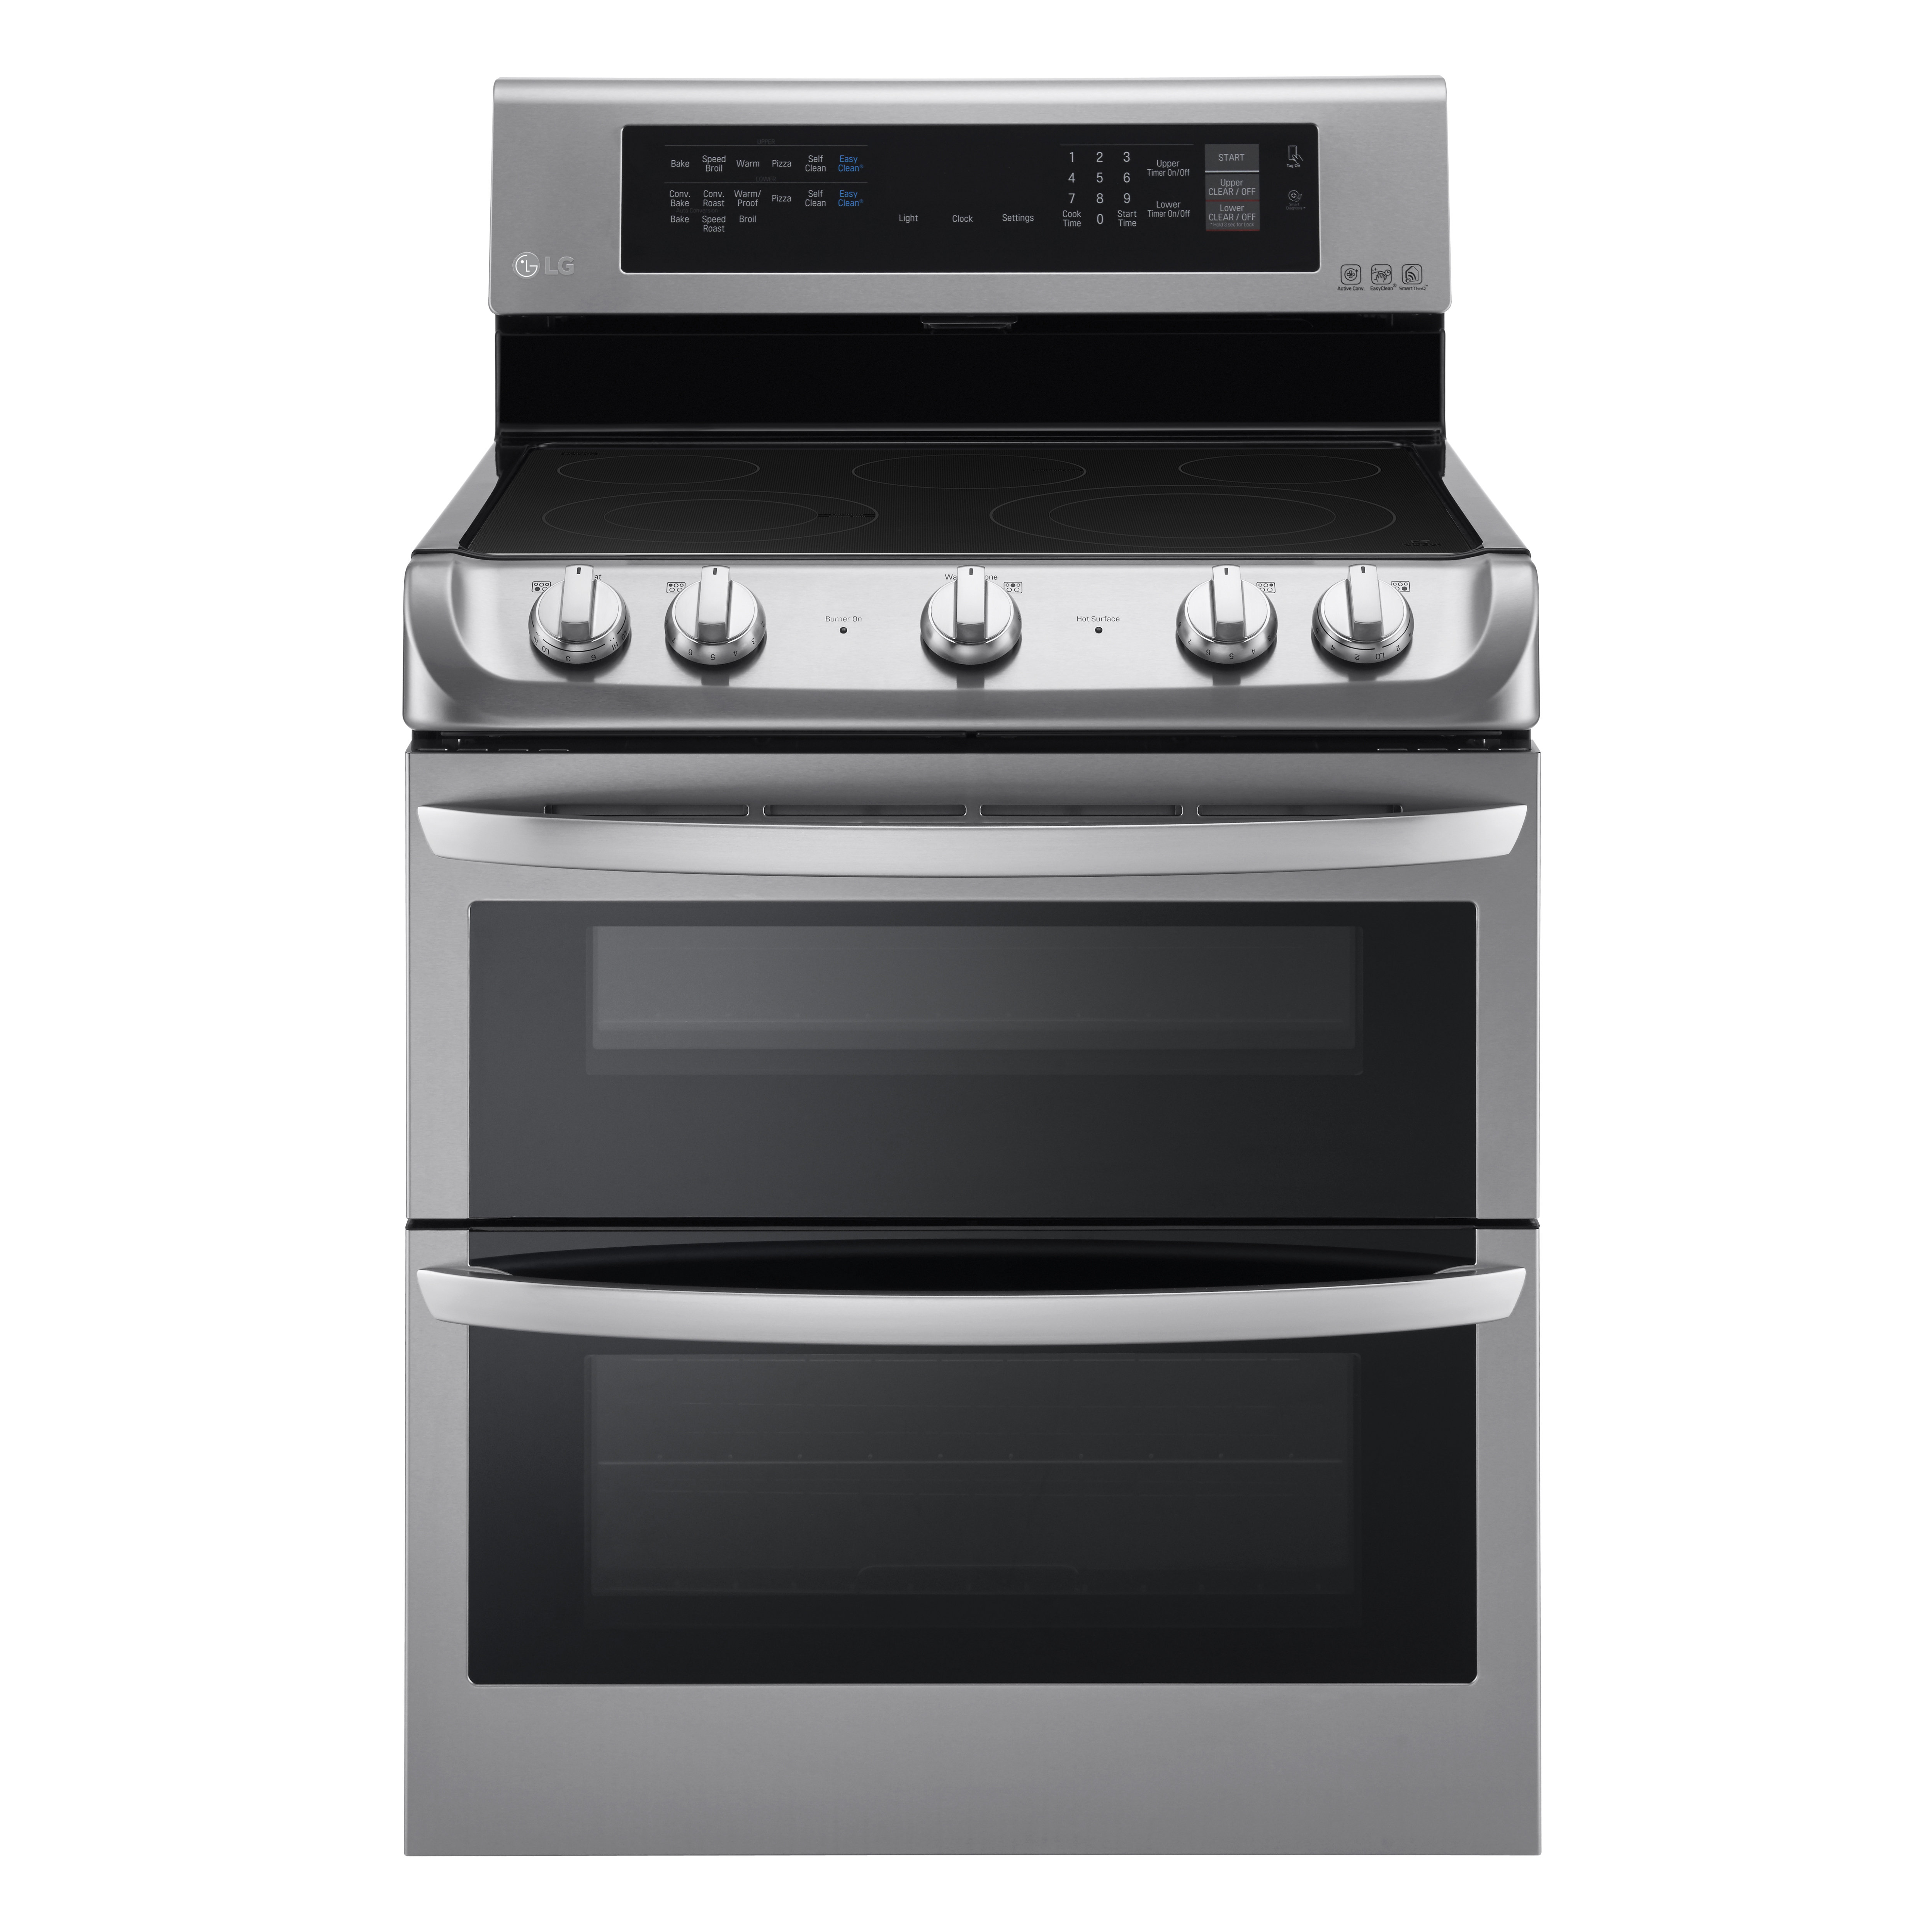 QUALITY GLOBAL 30 inch Electric Range Knob Control with Convection